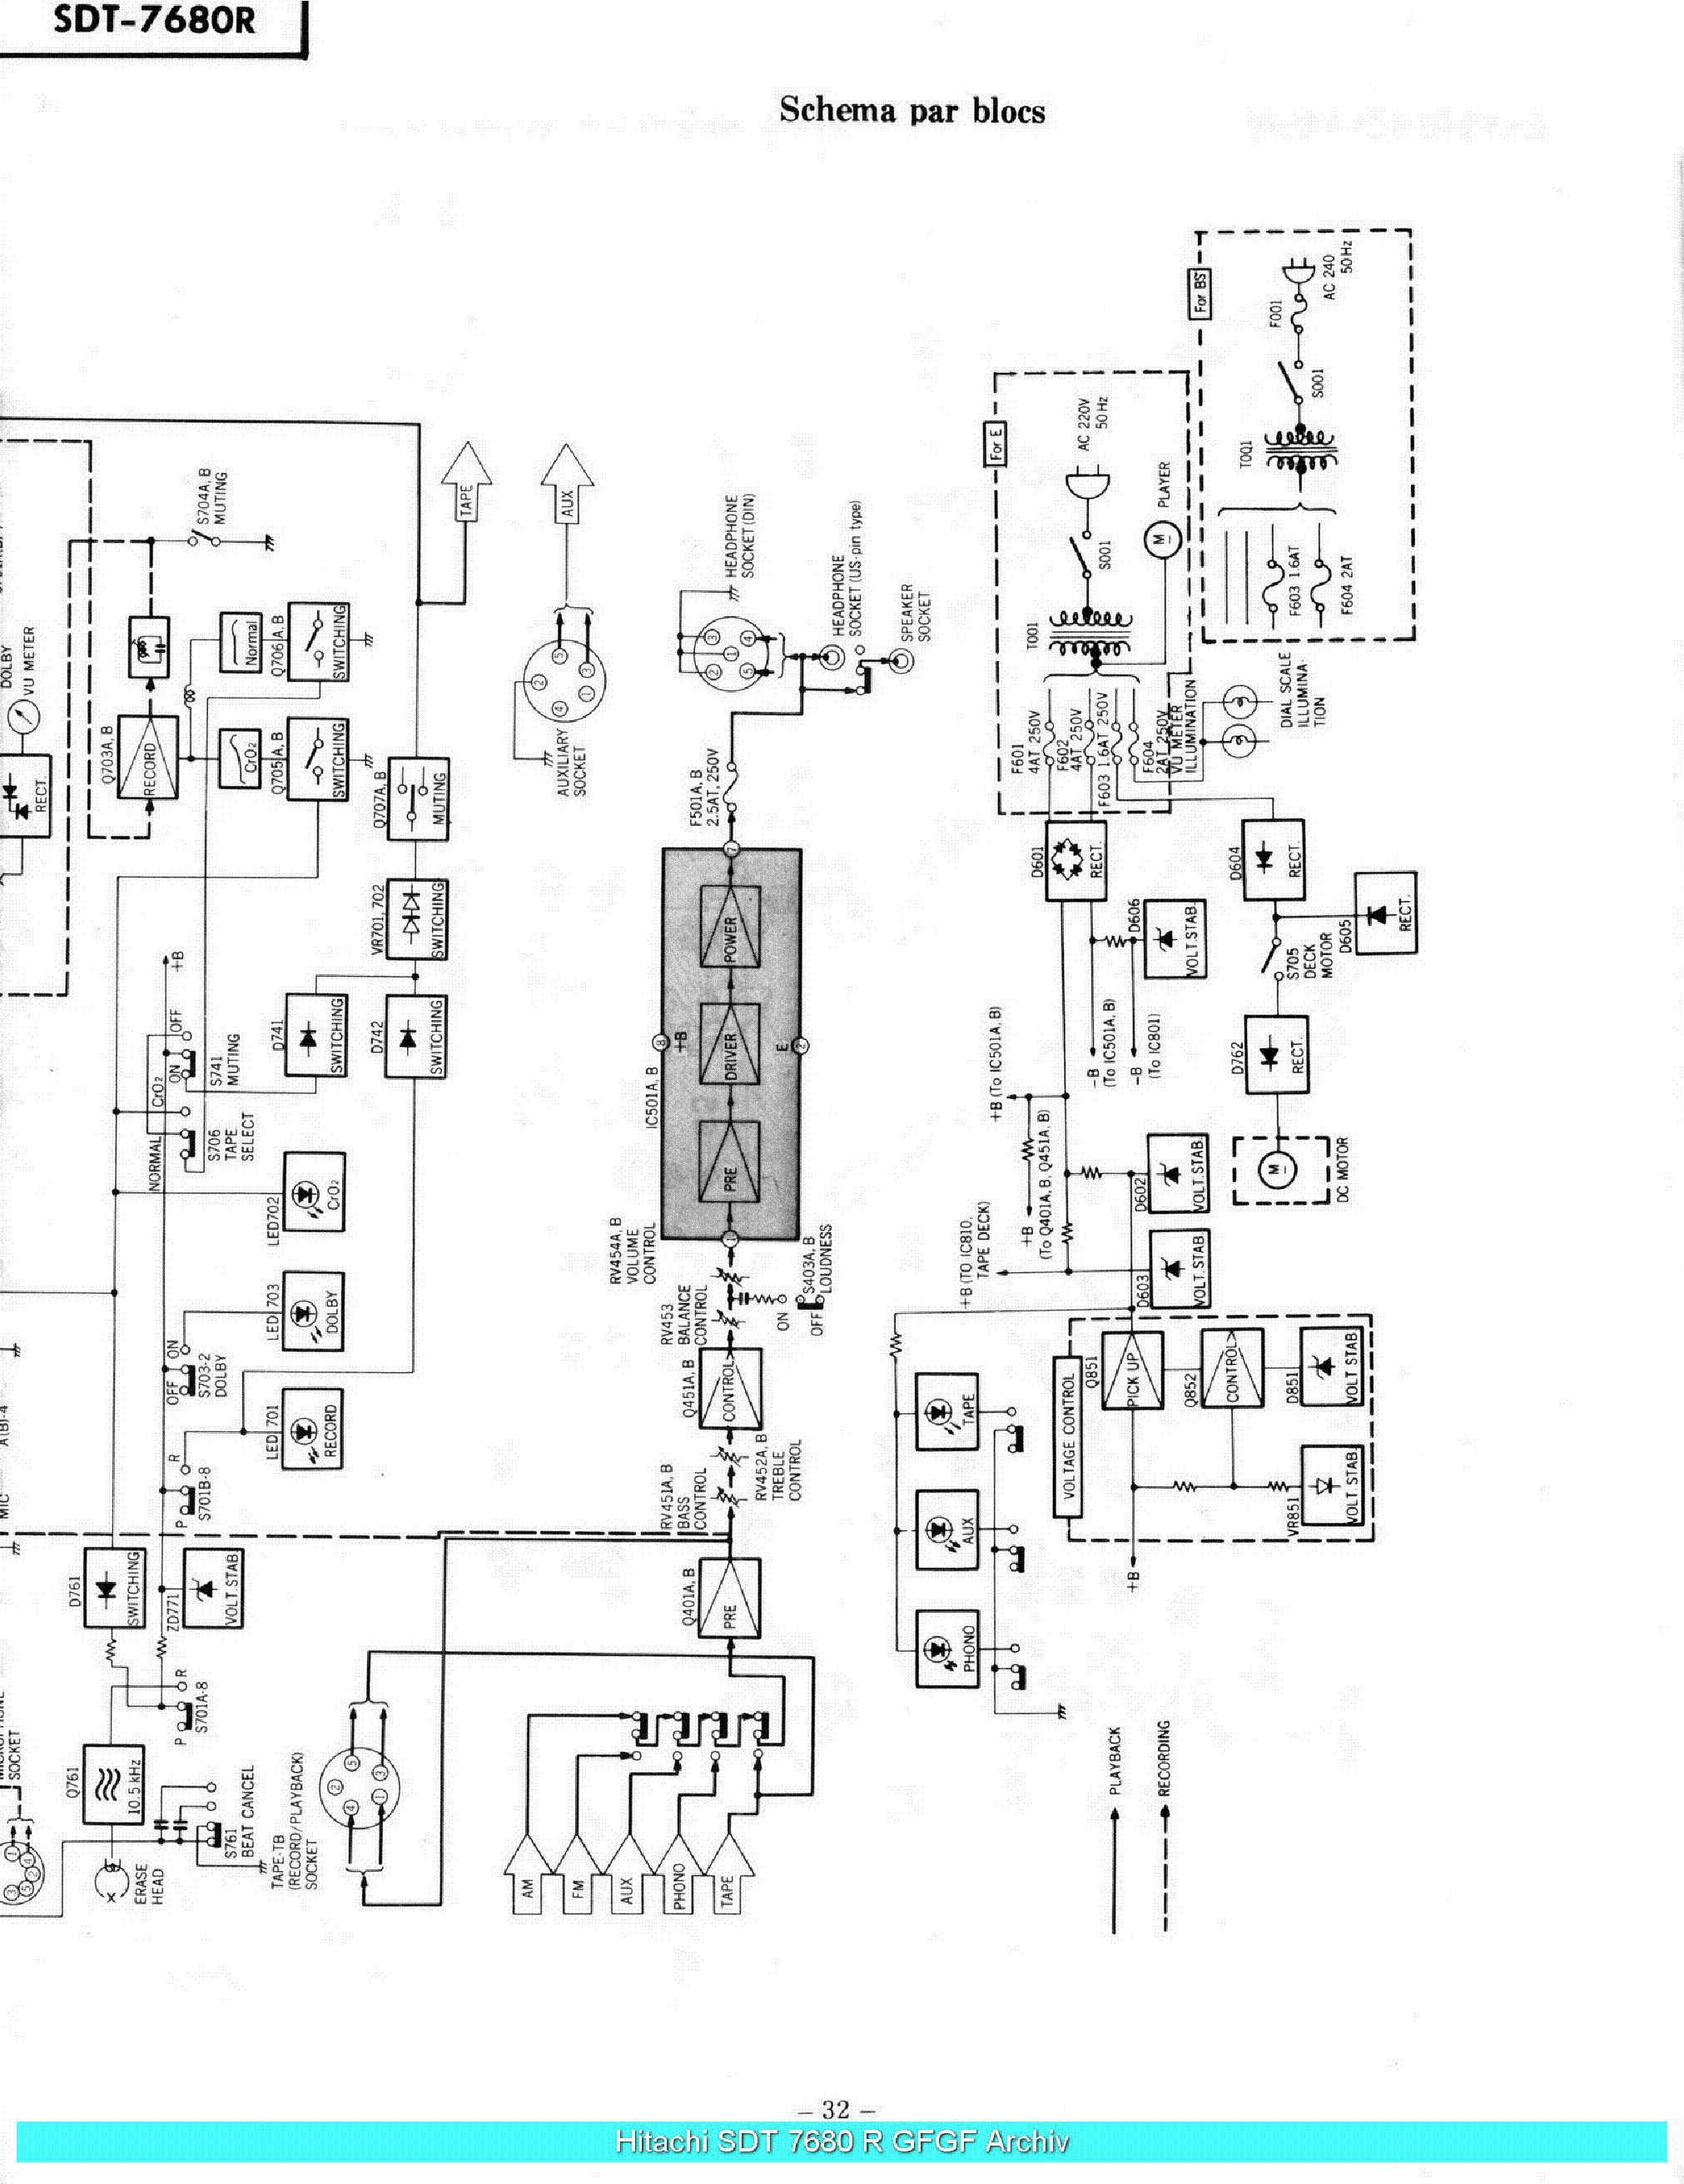 HITACHI SDT-7680R SCHEMATIC service manual (2nd page)